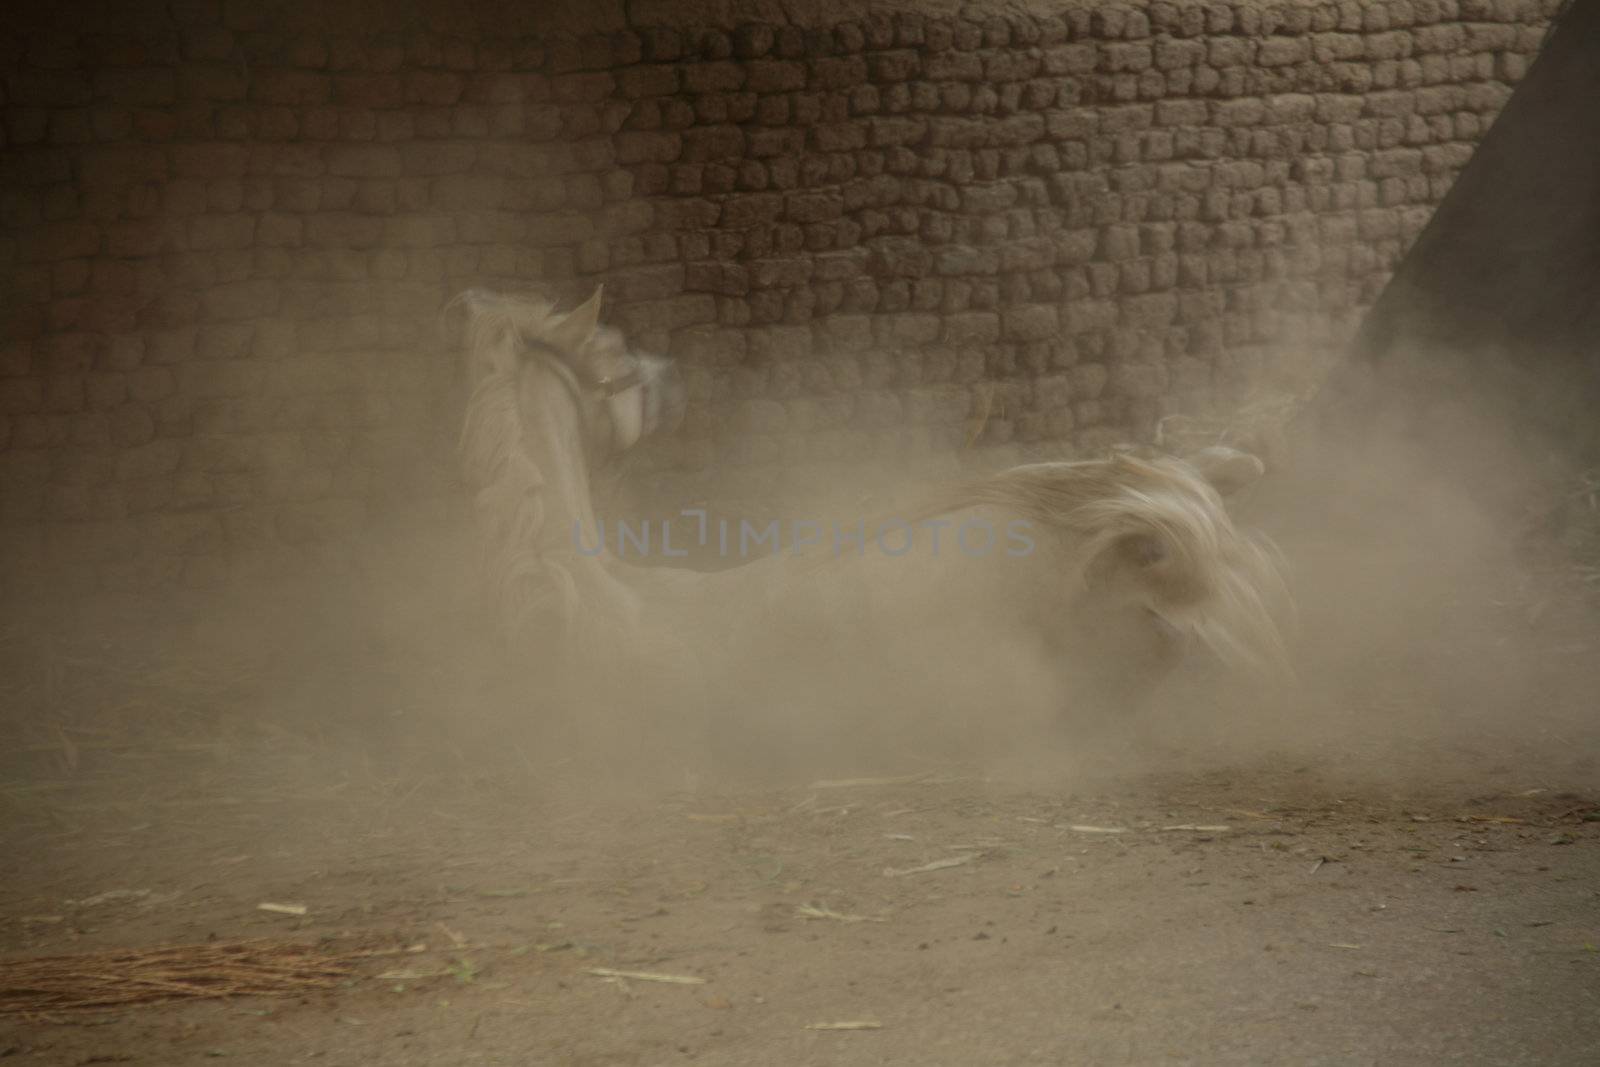 A horse falling on the floor, with motion blur as it lifts the dust.